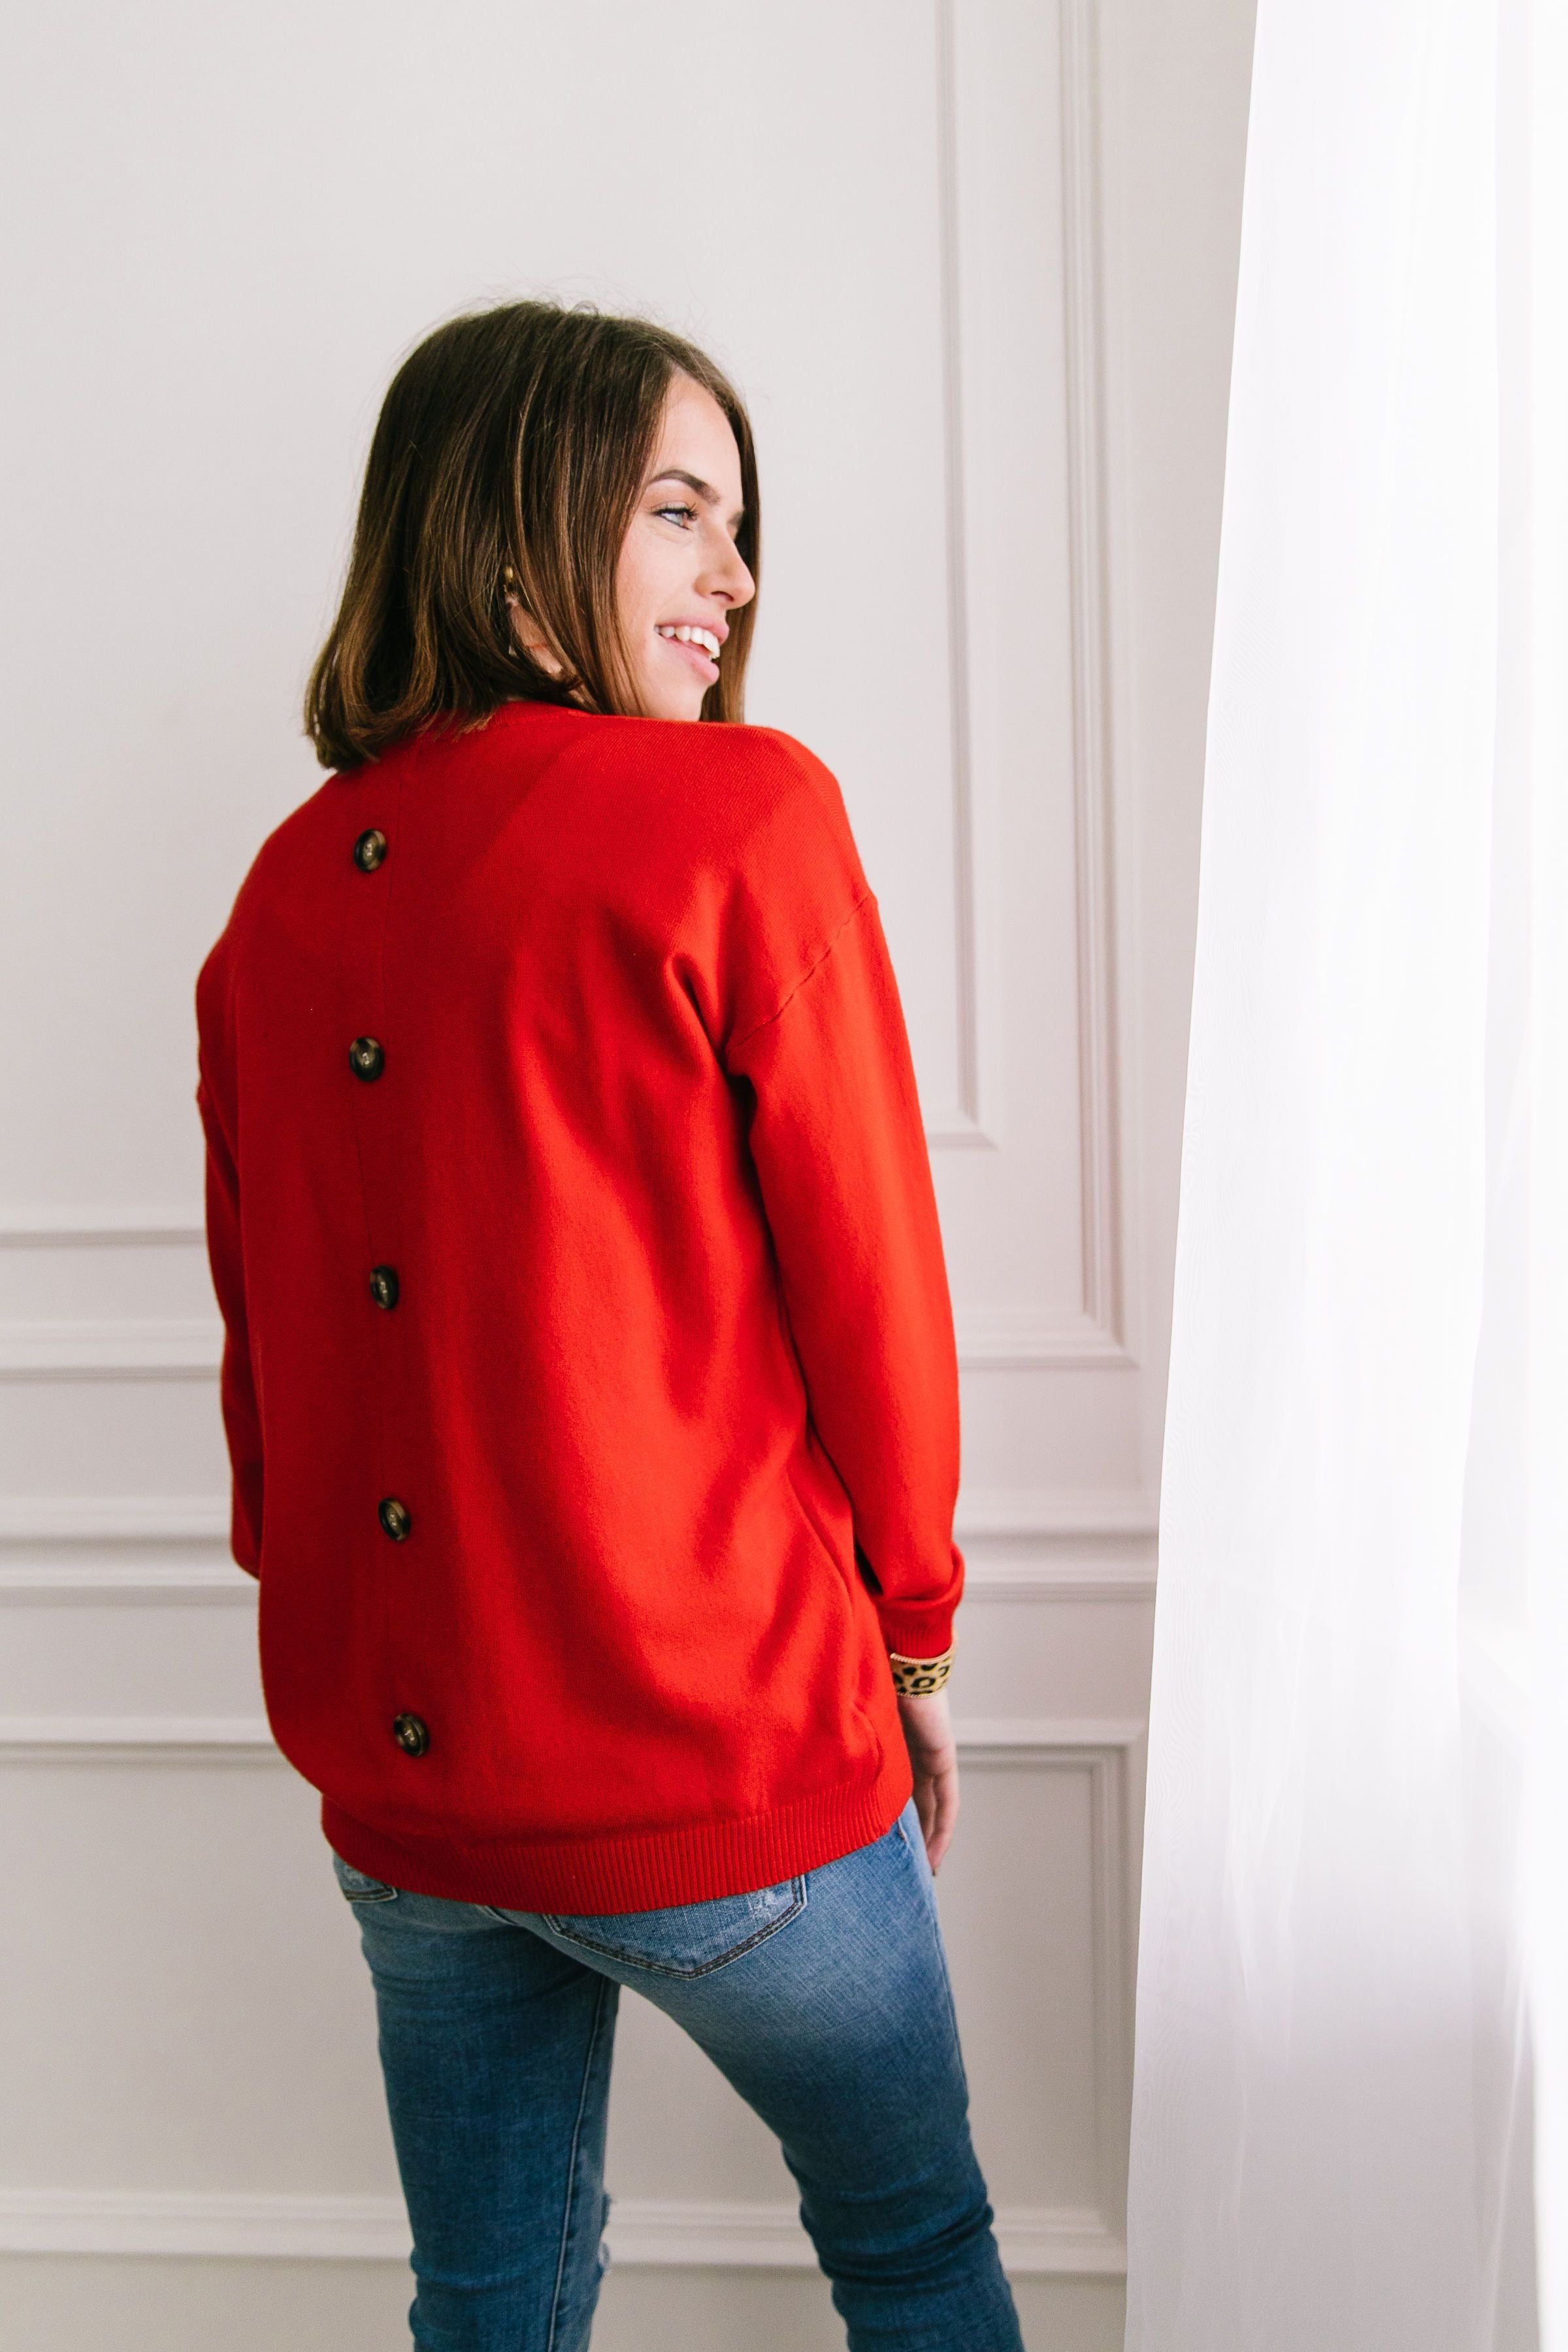 Top 'O The Mornin' Sweater In Poppy - ALL SALES FINAL